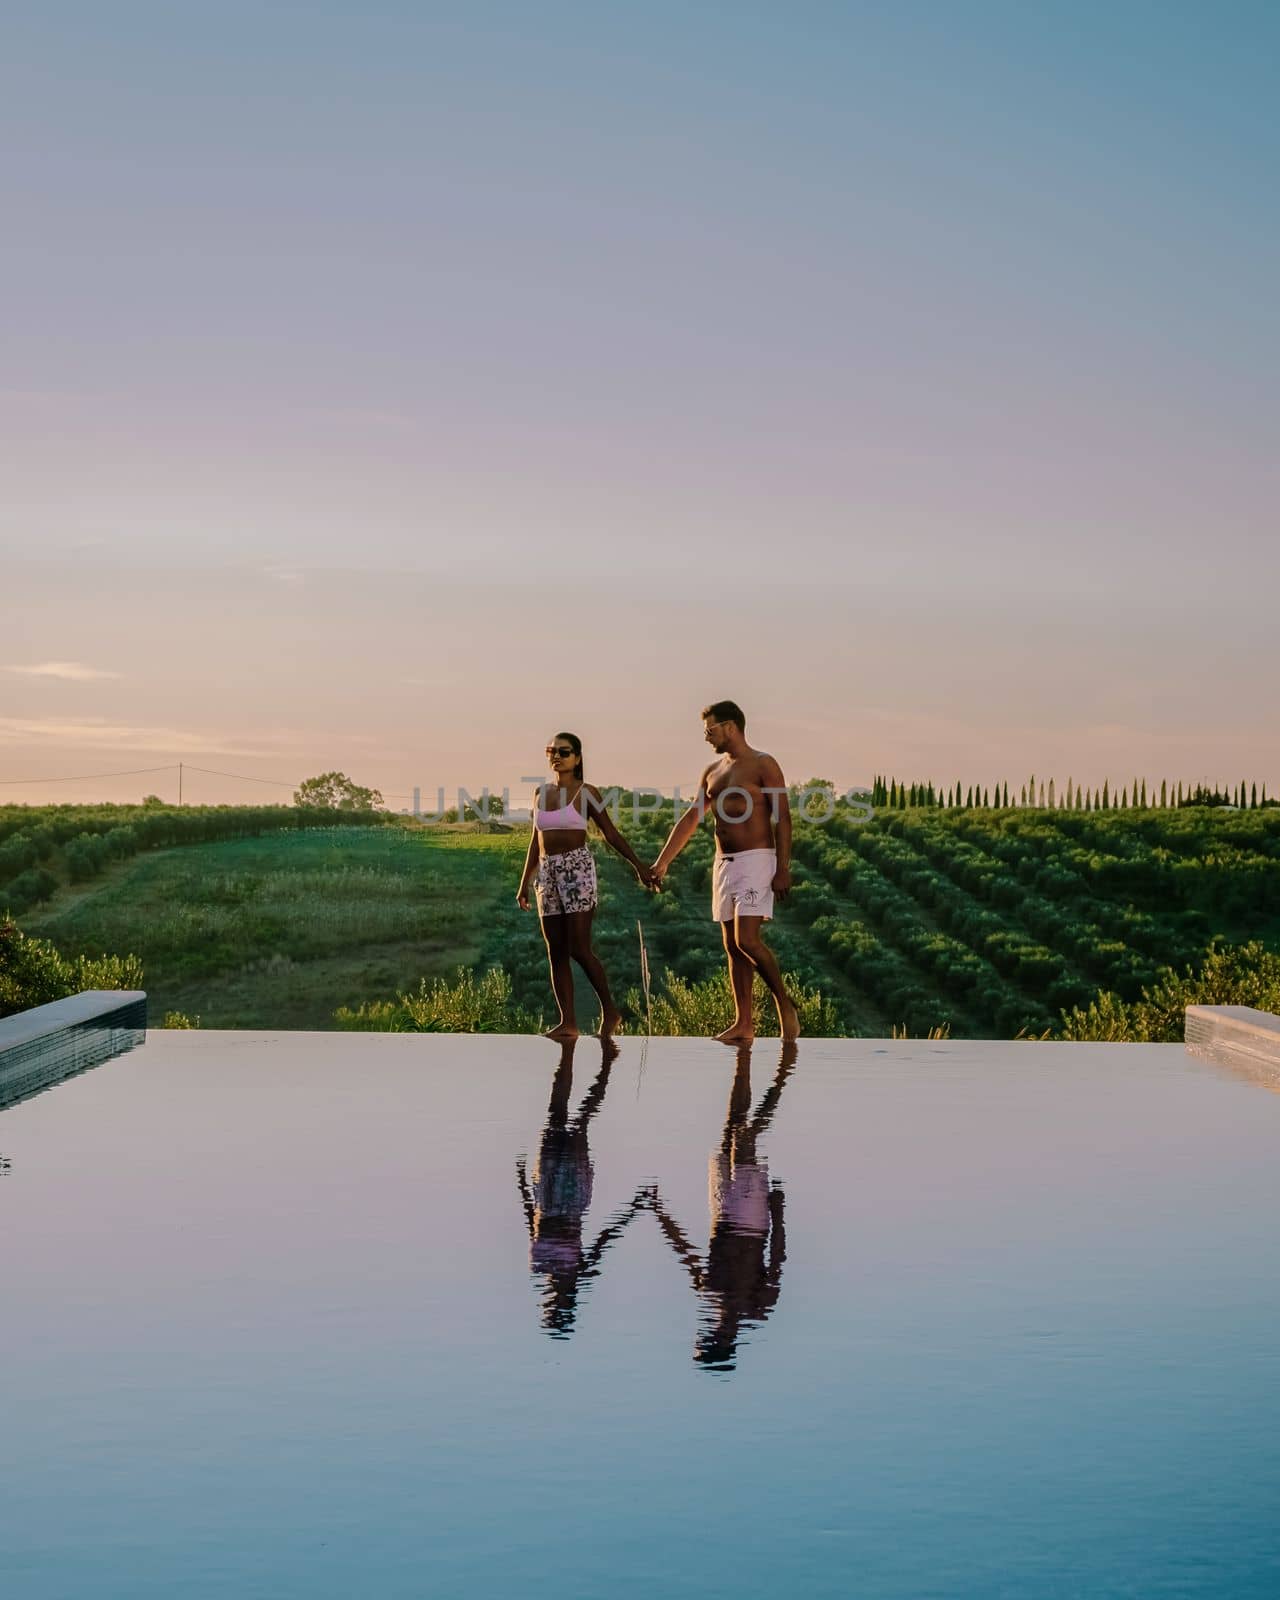 Couple at a Luxury resort swimming pool with a view over wine fields at sunset in Sicily Italy by fokkebok